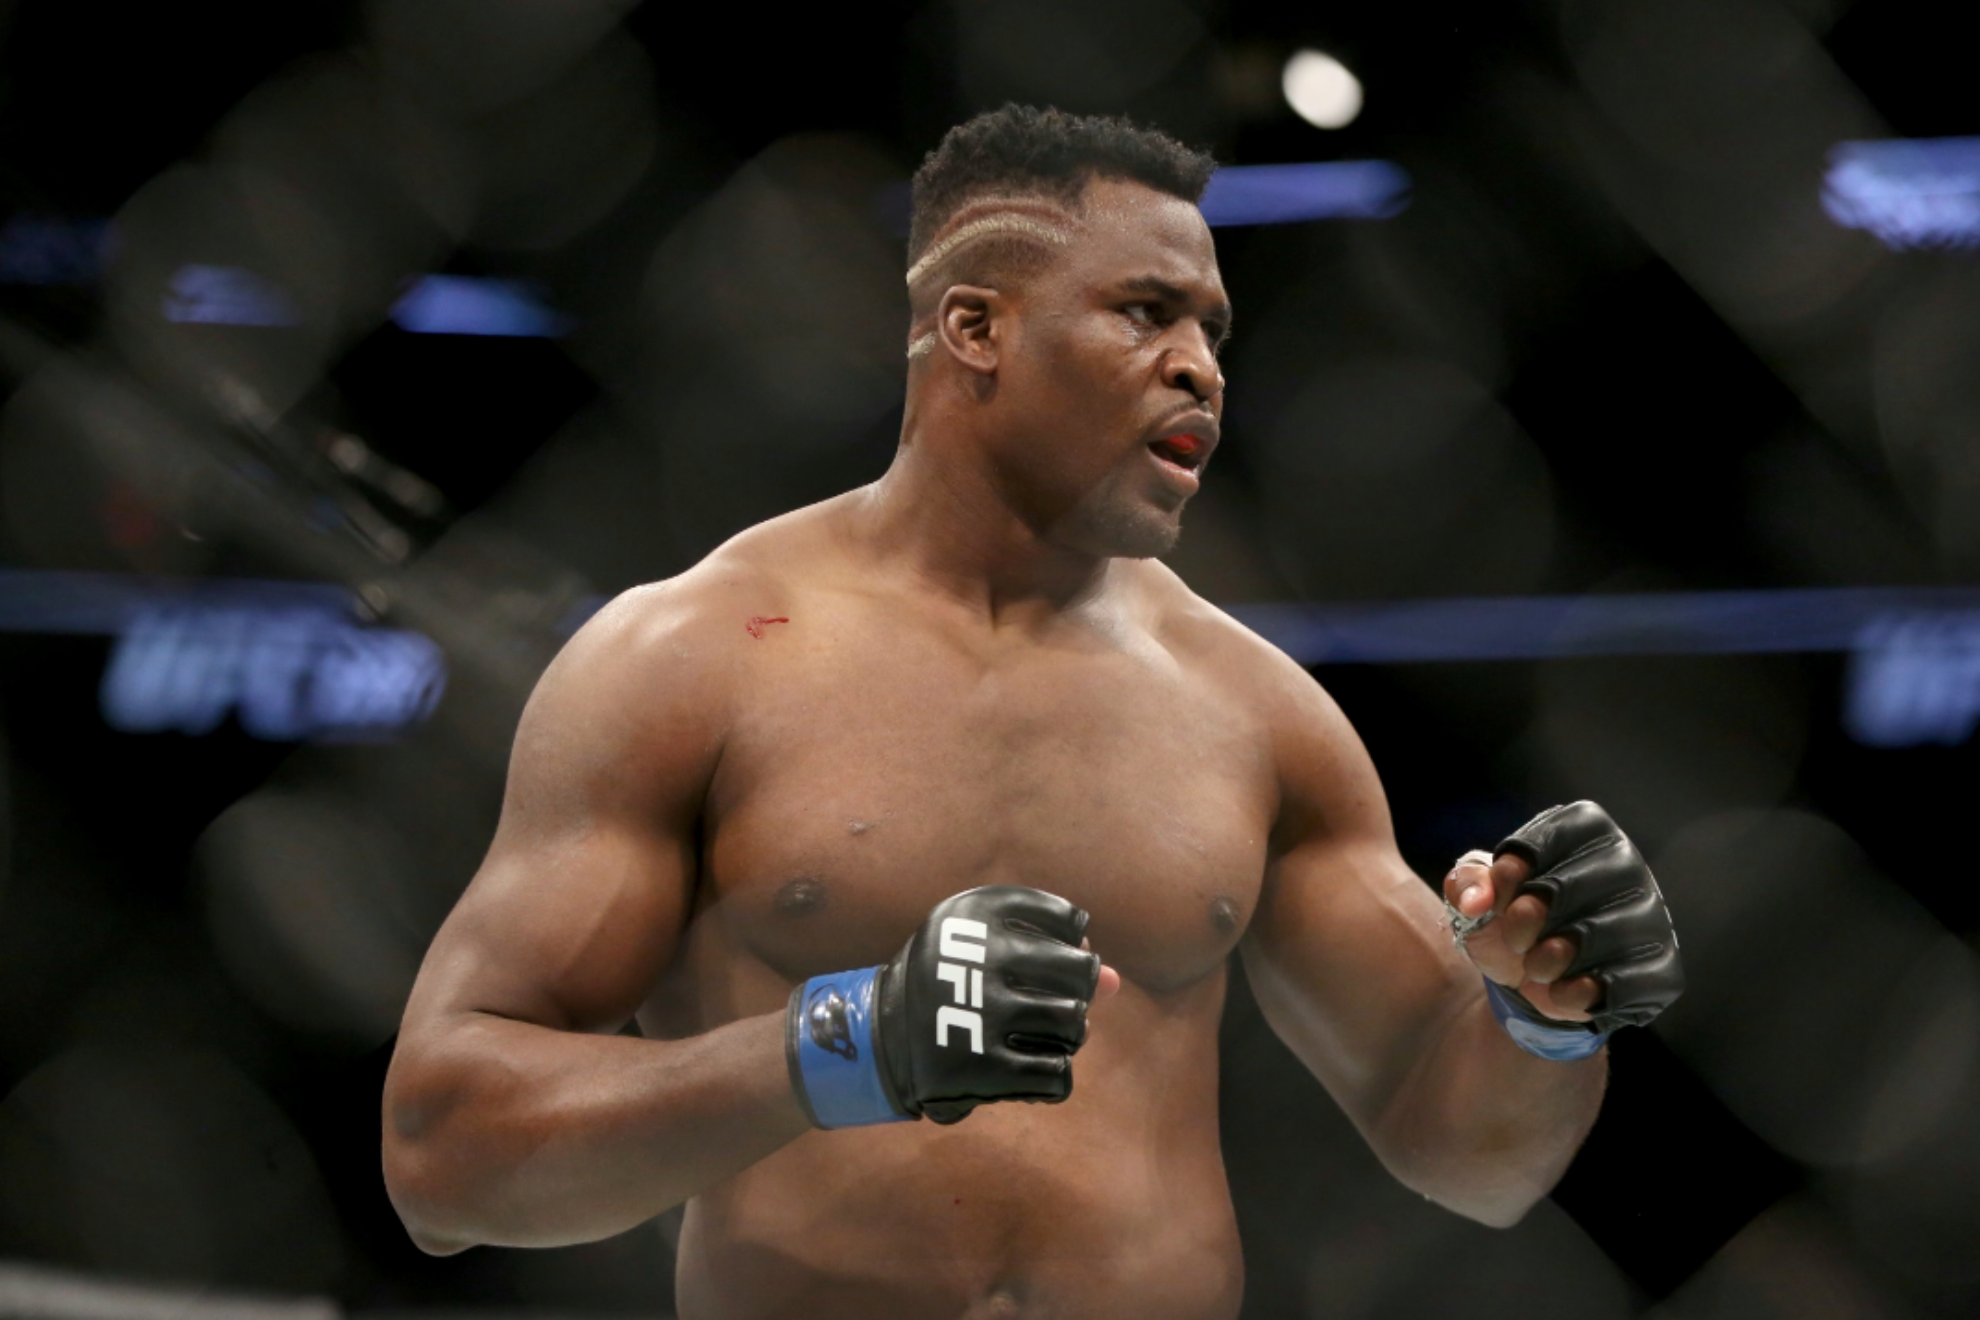 Ngannou fails to impress and Mike Tyson is thought to have more of a chance against Tyson Fury